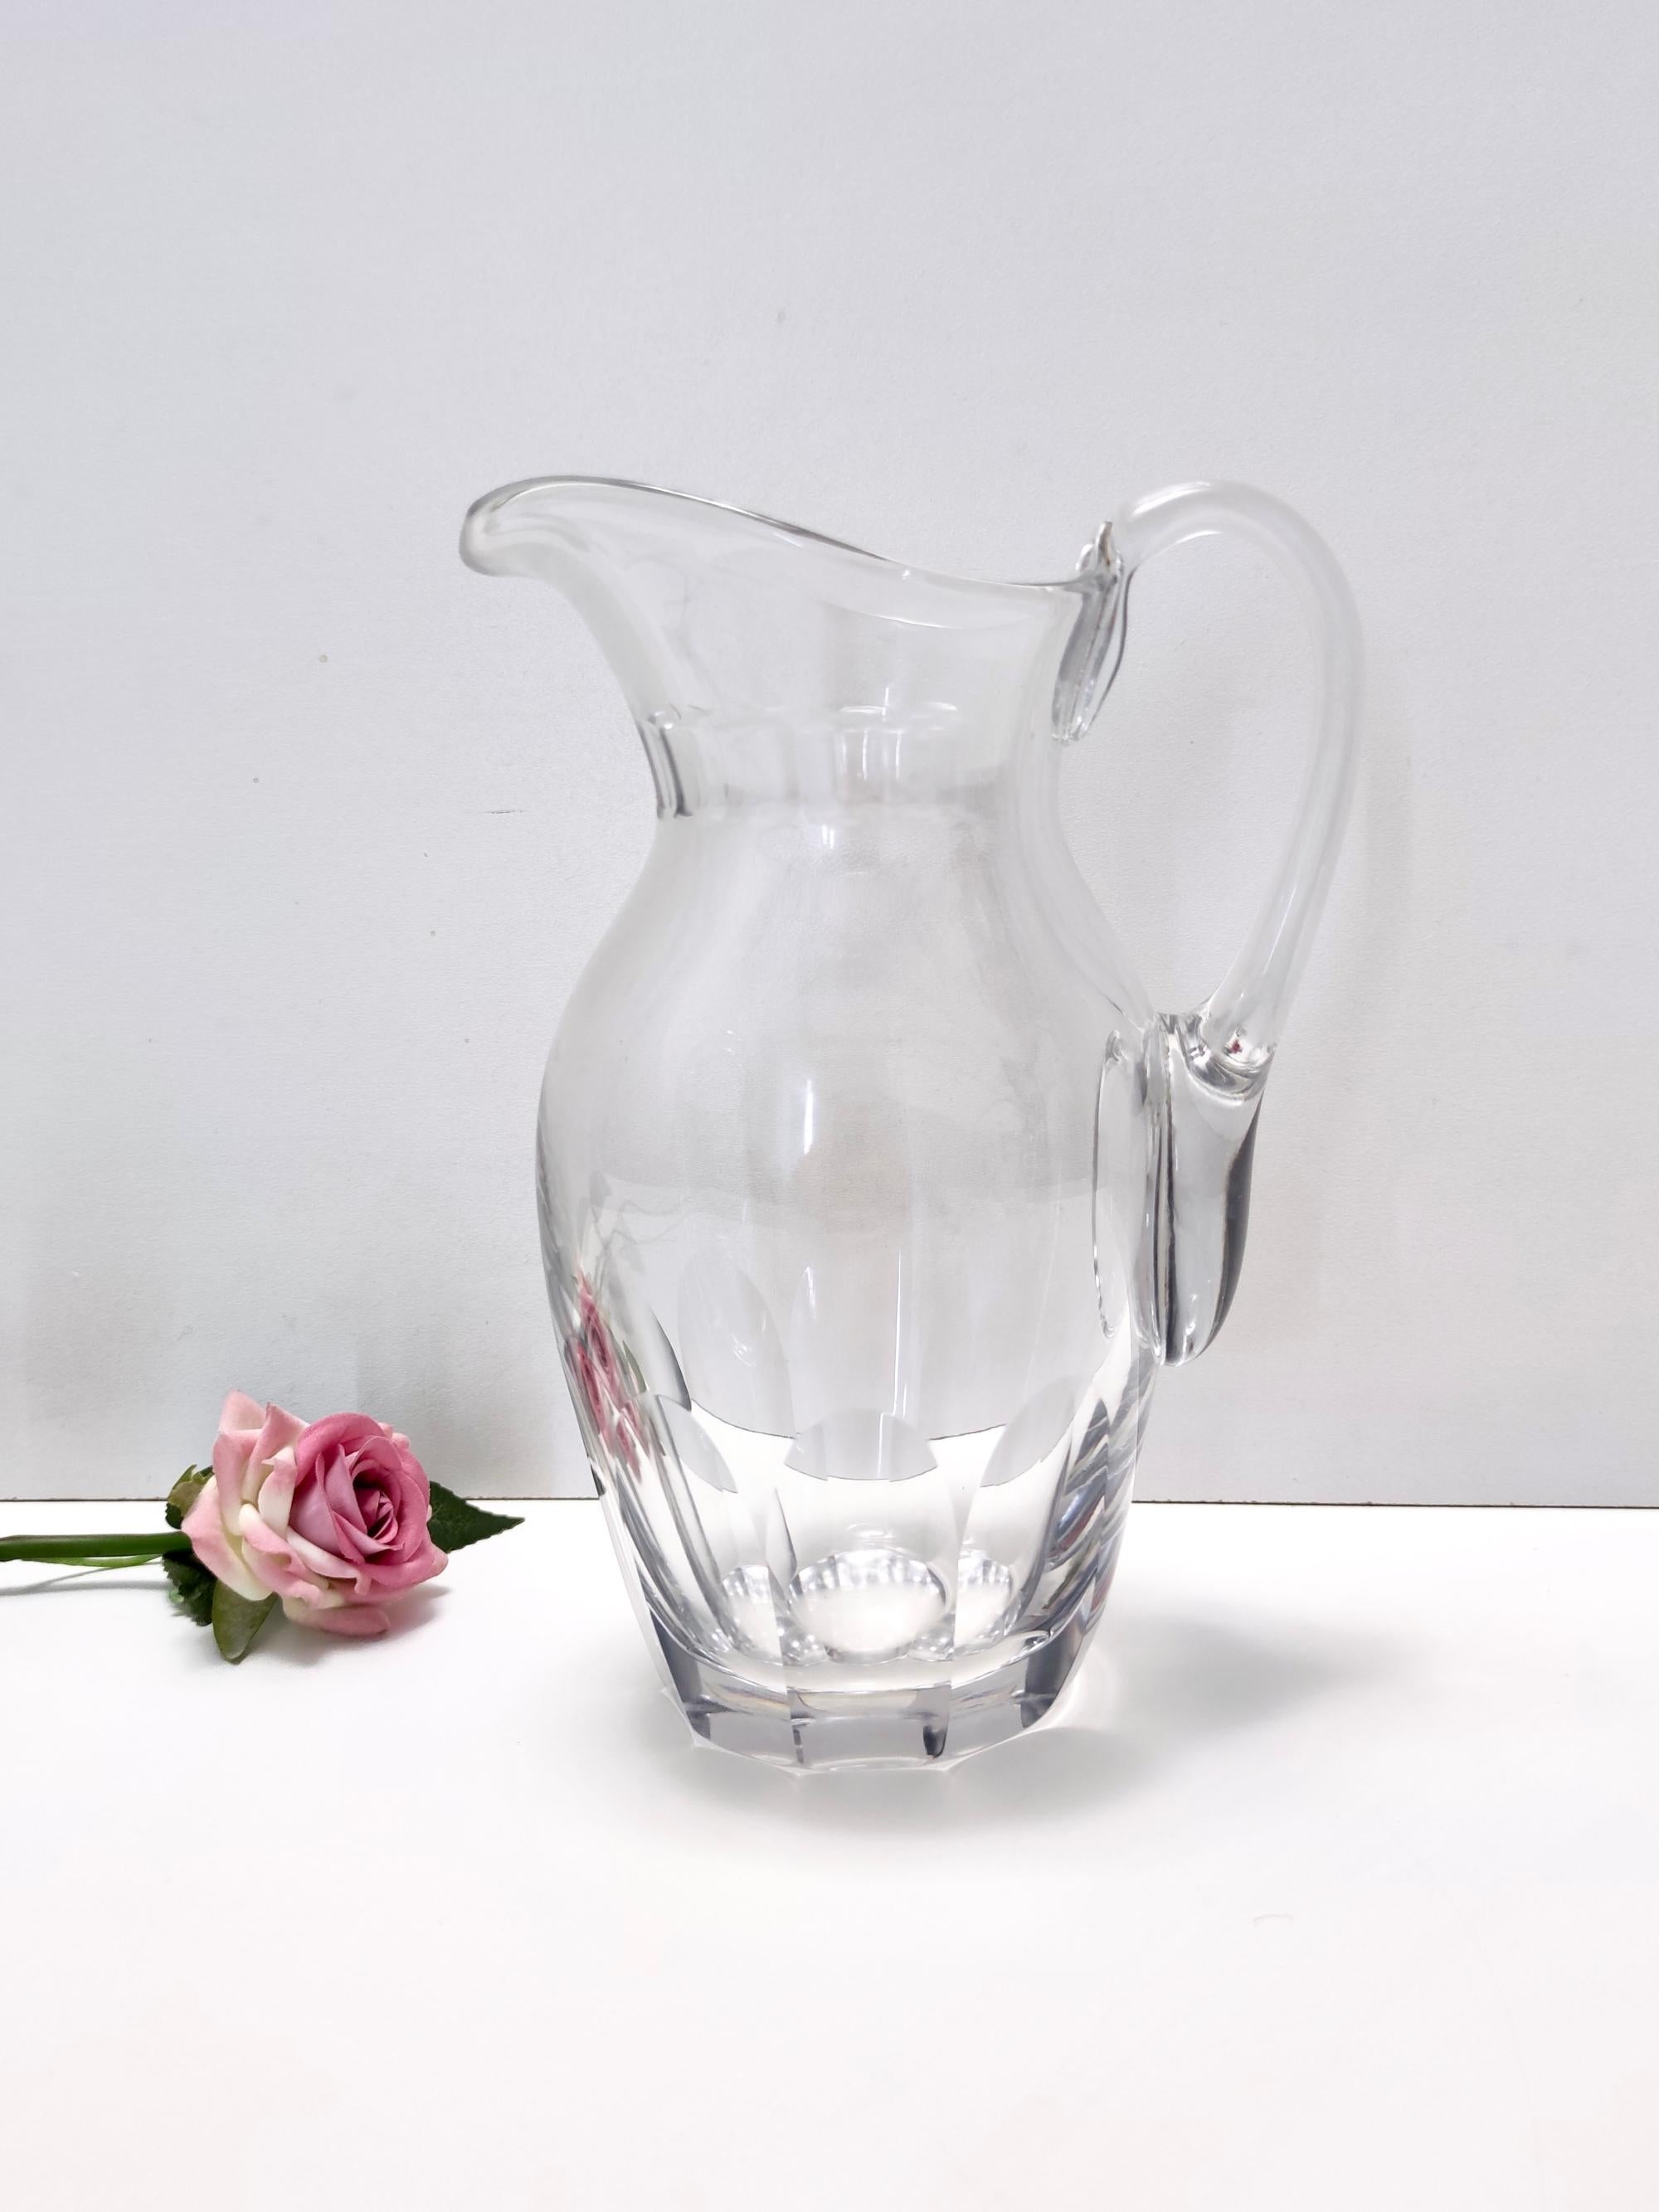 1960s.
This high-quality pitcher / vase is made in transparent crystal. 
It is a vintage piece, therefore it might show slight traces of use, but it can be considered as in perfect original condition and ready to become a piece in a home.